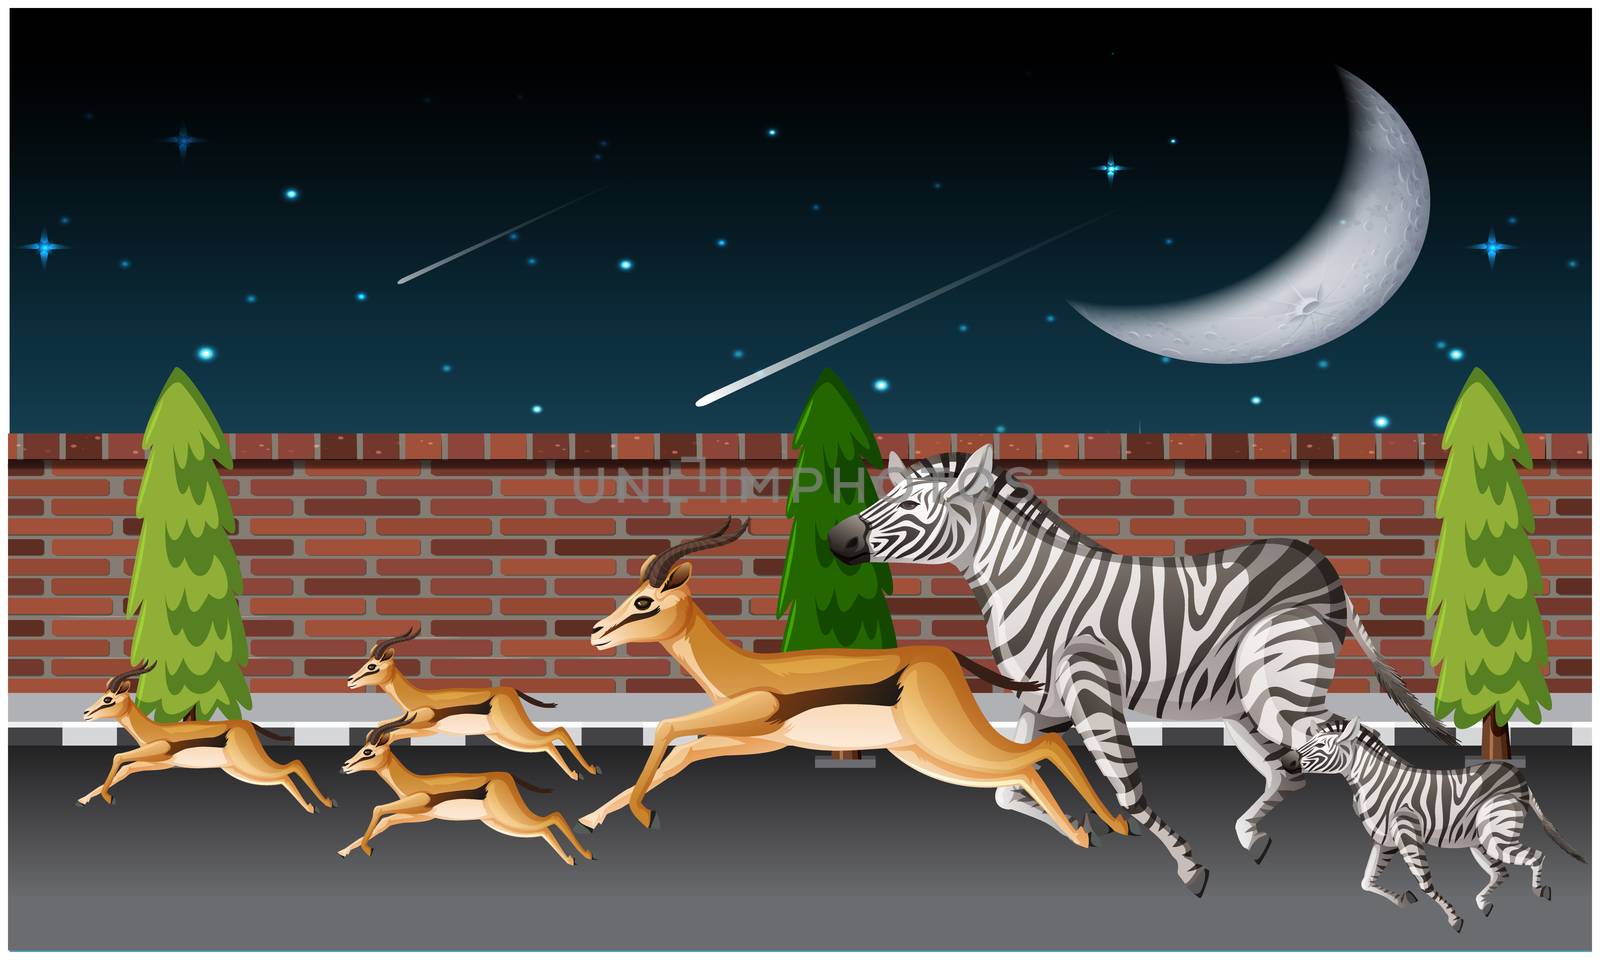 several animals are running on road in night